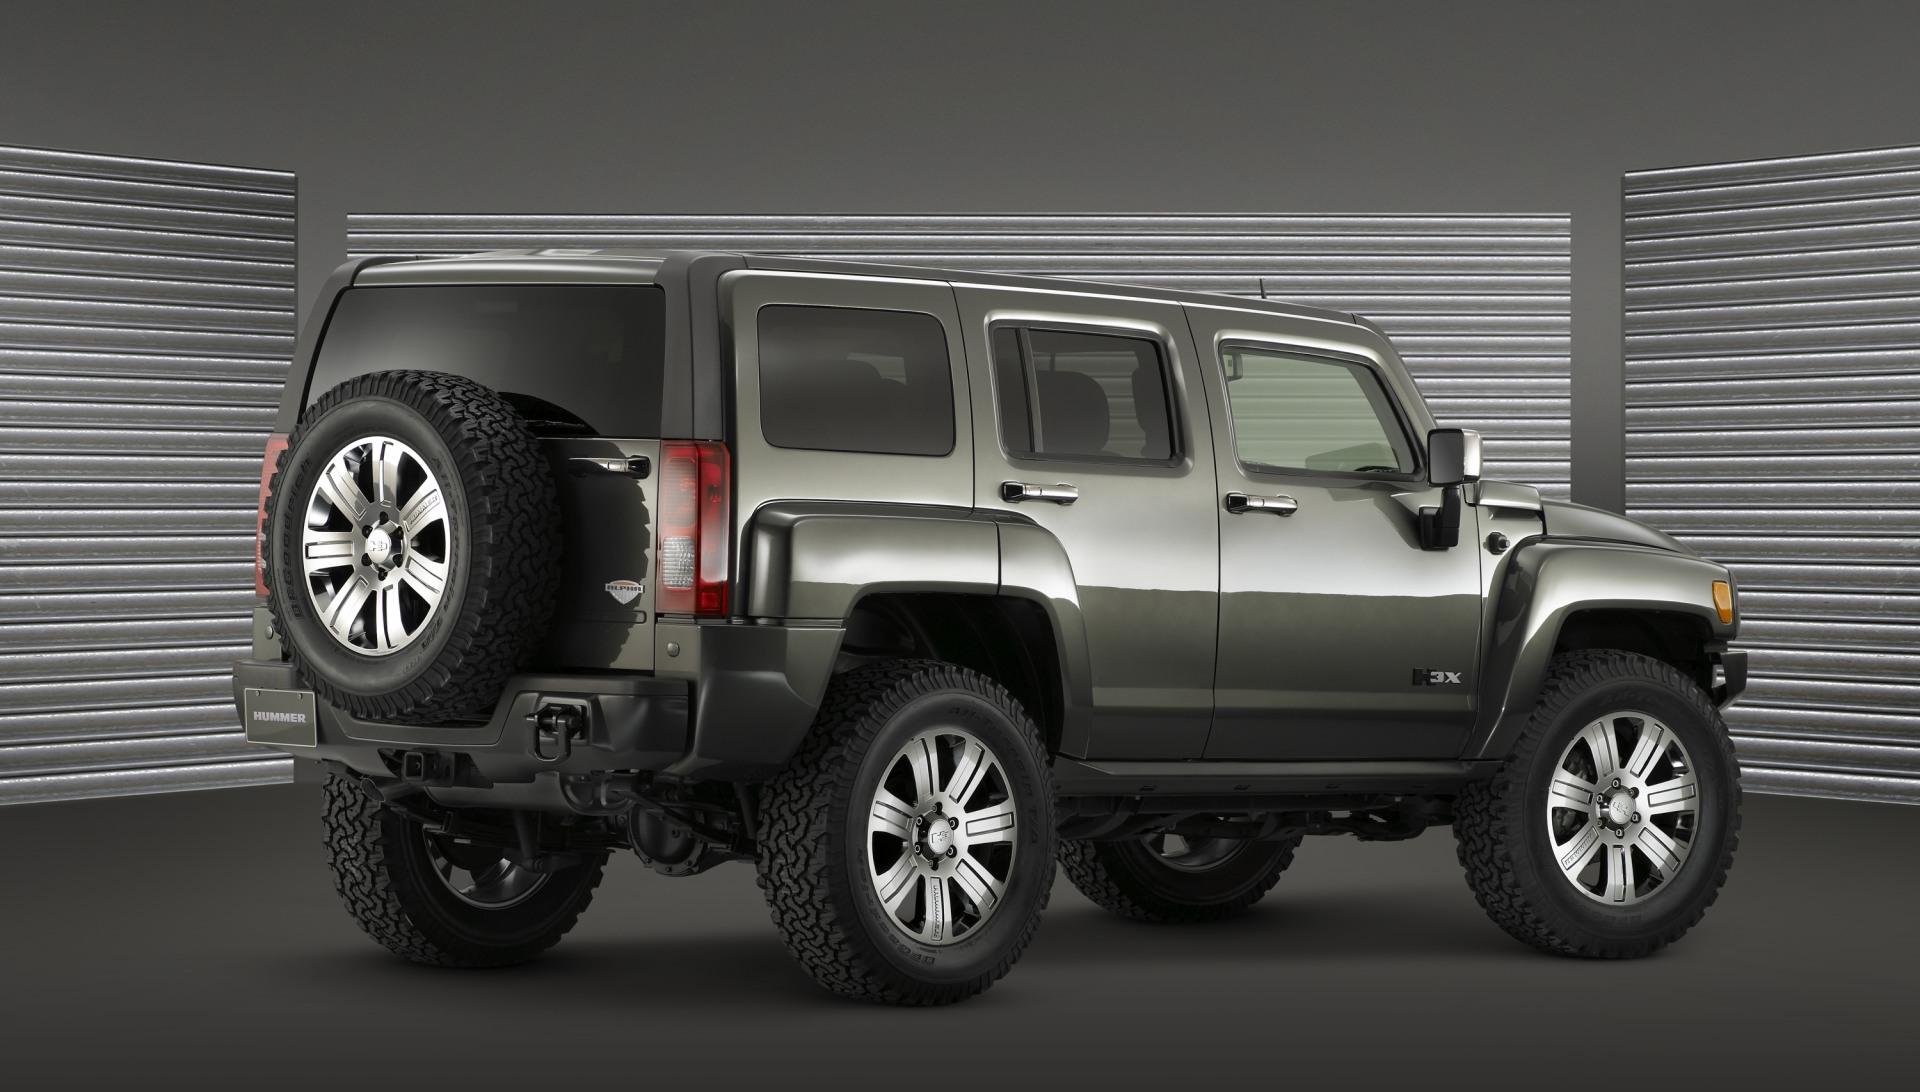 2009 Hummer H3 X Concept News and Information, Research, and Pricing